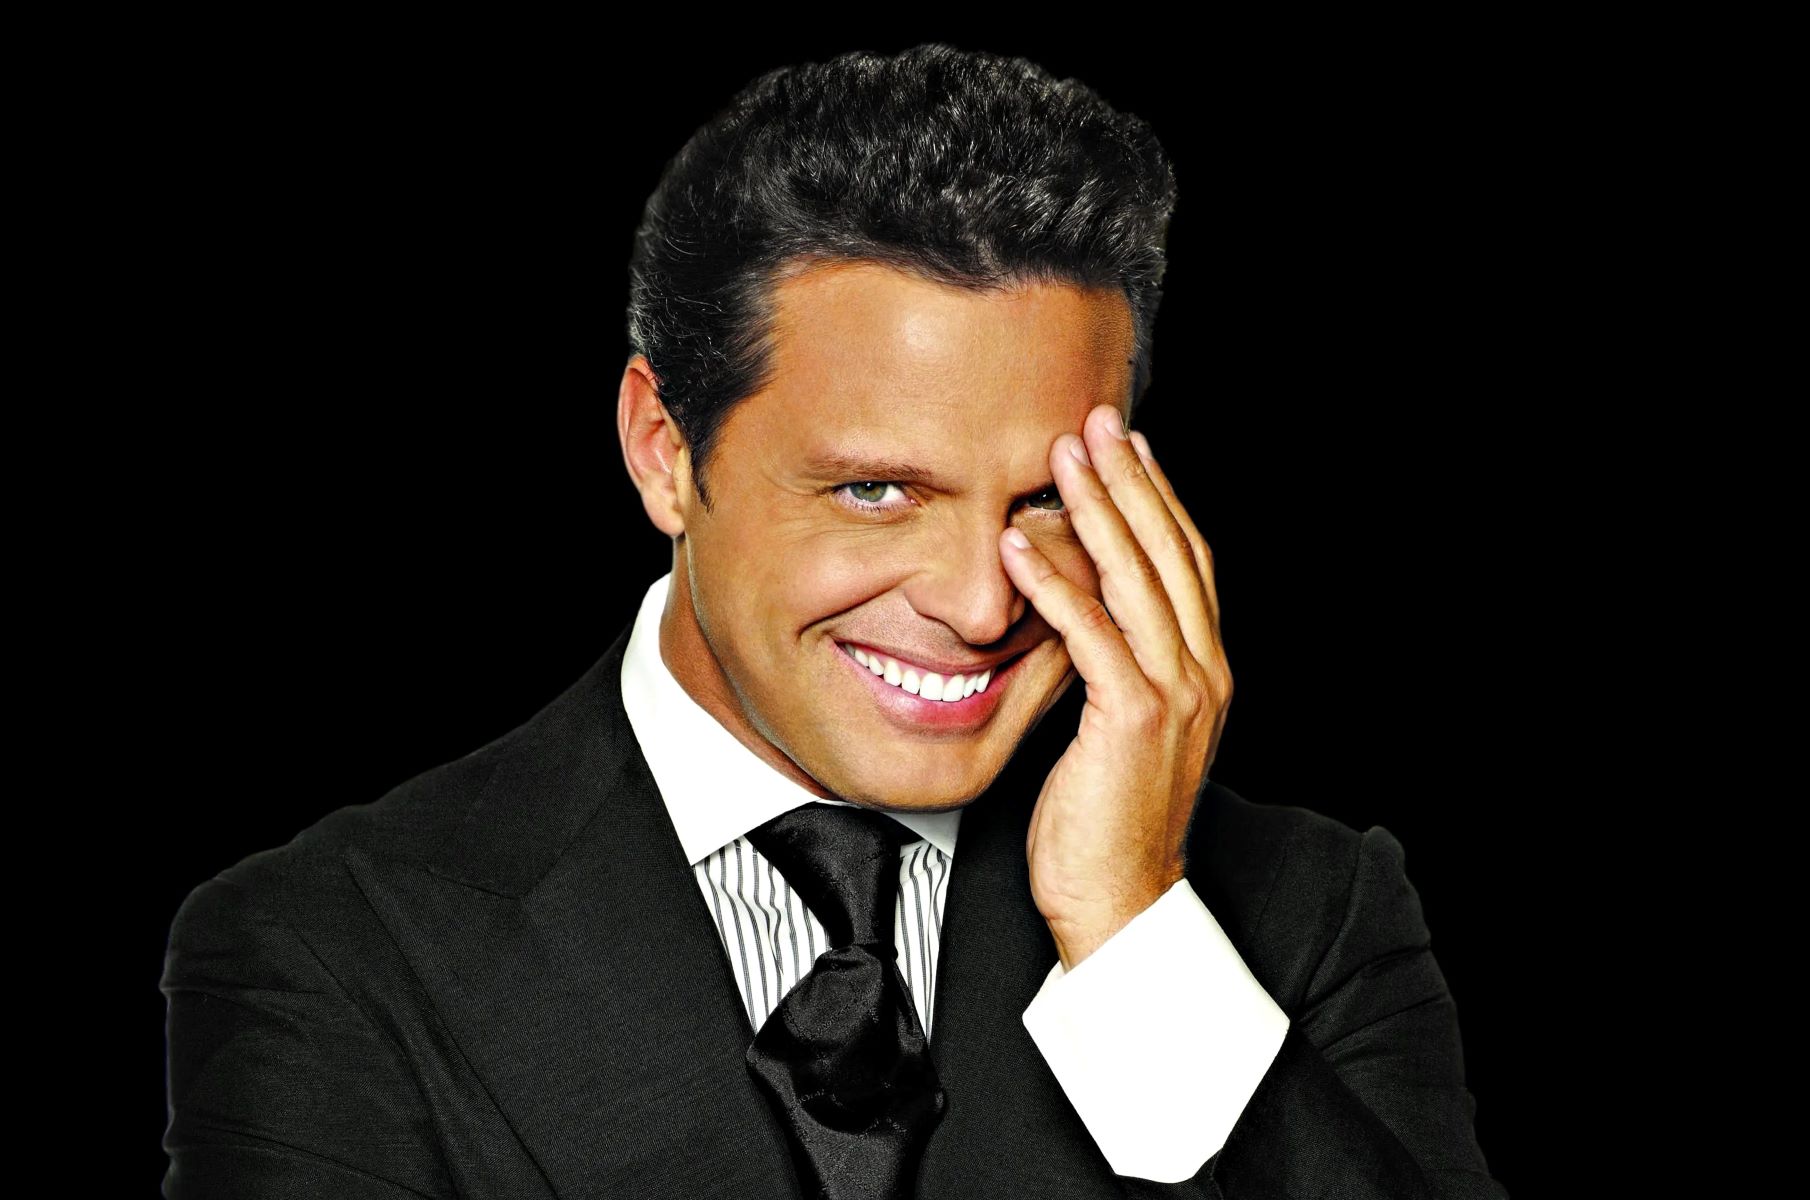 19 Captivating Facts About Luis Miguel - Facts.net